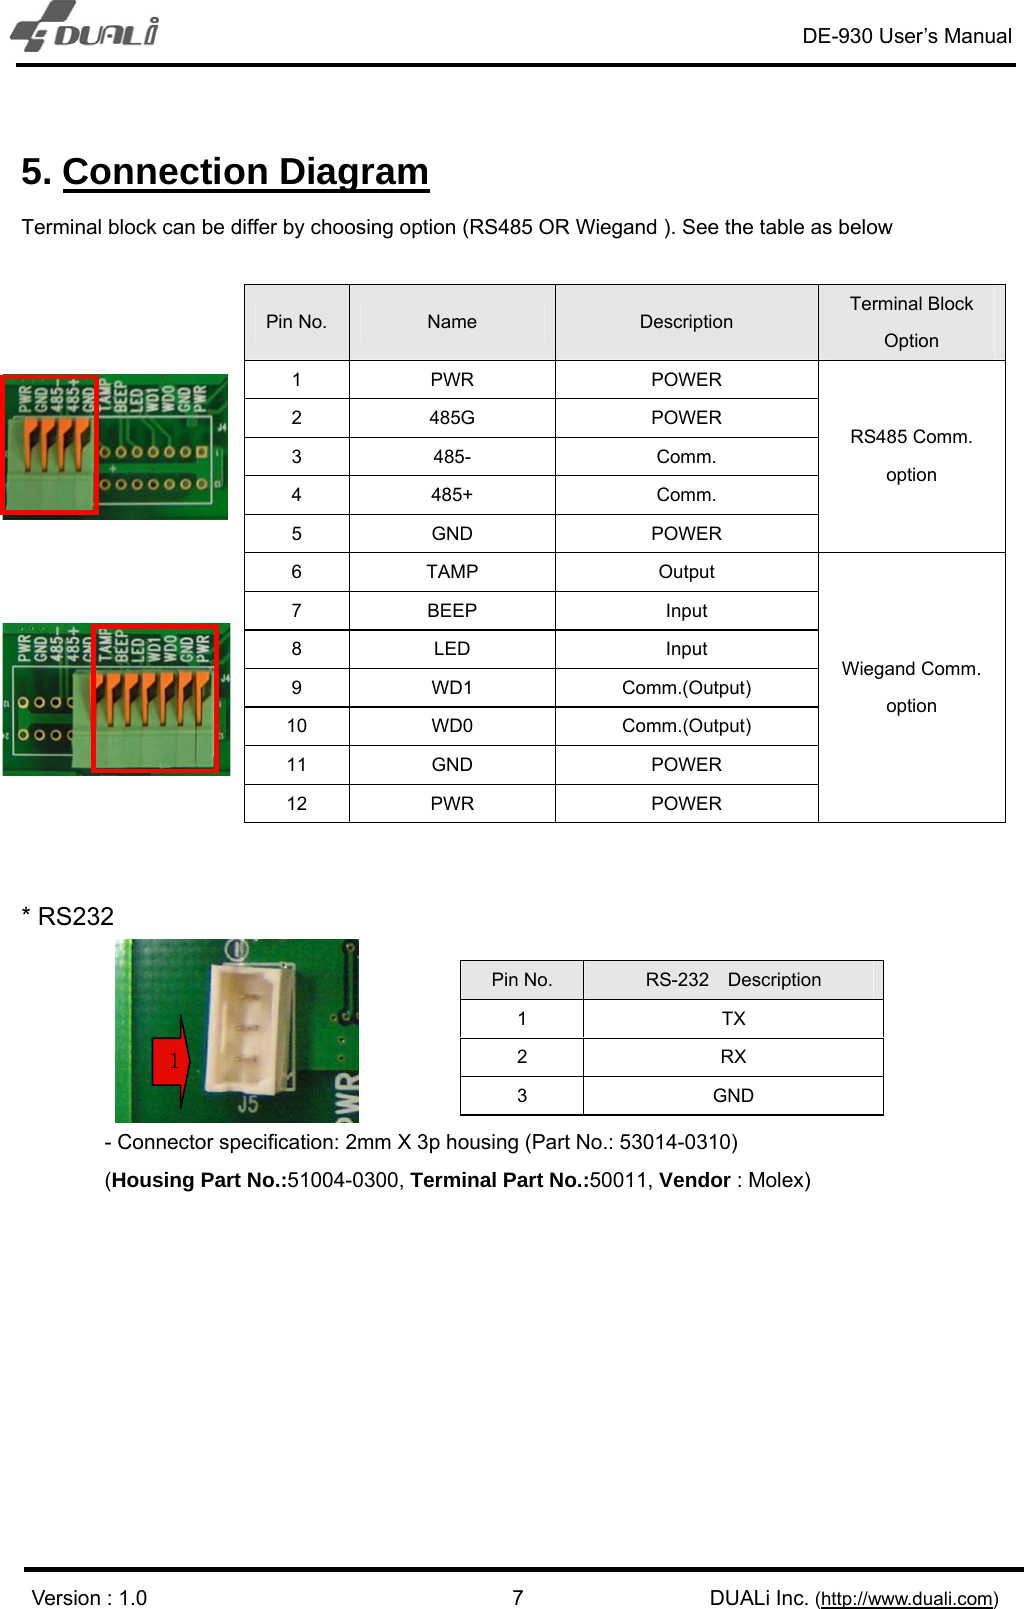 DE-930 User’s Manual   Version : 1.0                                             DUALi Inc. (http://www.duali.com) 75. Connection Diagram Terminal block can be differ by choosing option (RS485 OR Wiegand ). See the table as below  Pin No.  Name  Description Terminal Block Option 1 PWR  POWER 2 485G  POWER 3 485-  Comm. 4 485+  Comm. 5 GND  POWER RS485 Comm. option 6 TAMP  Output 7 BEEP  Input 8 LED  Input 9 WD1  Comm.(Output) 10 WD0  Comm.(Output) 11 GND  POWER 12 PWR  POWER Wiegand Comm. option   * RS232          - Connector specification: 2mm X 3p housing (Part No.: 53014-0310)  (Housing Part No.:51004-0300, Terminal Part No.:50011, Vendor : Molex)  Pin No.  RS-232  Description 1 TX 2 RX 3 GND 1 